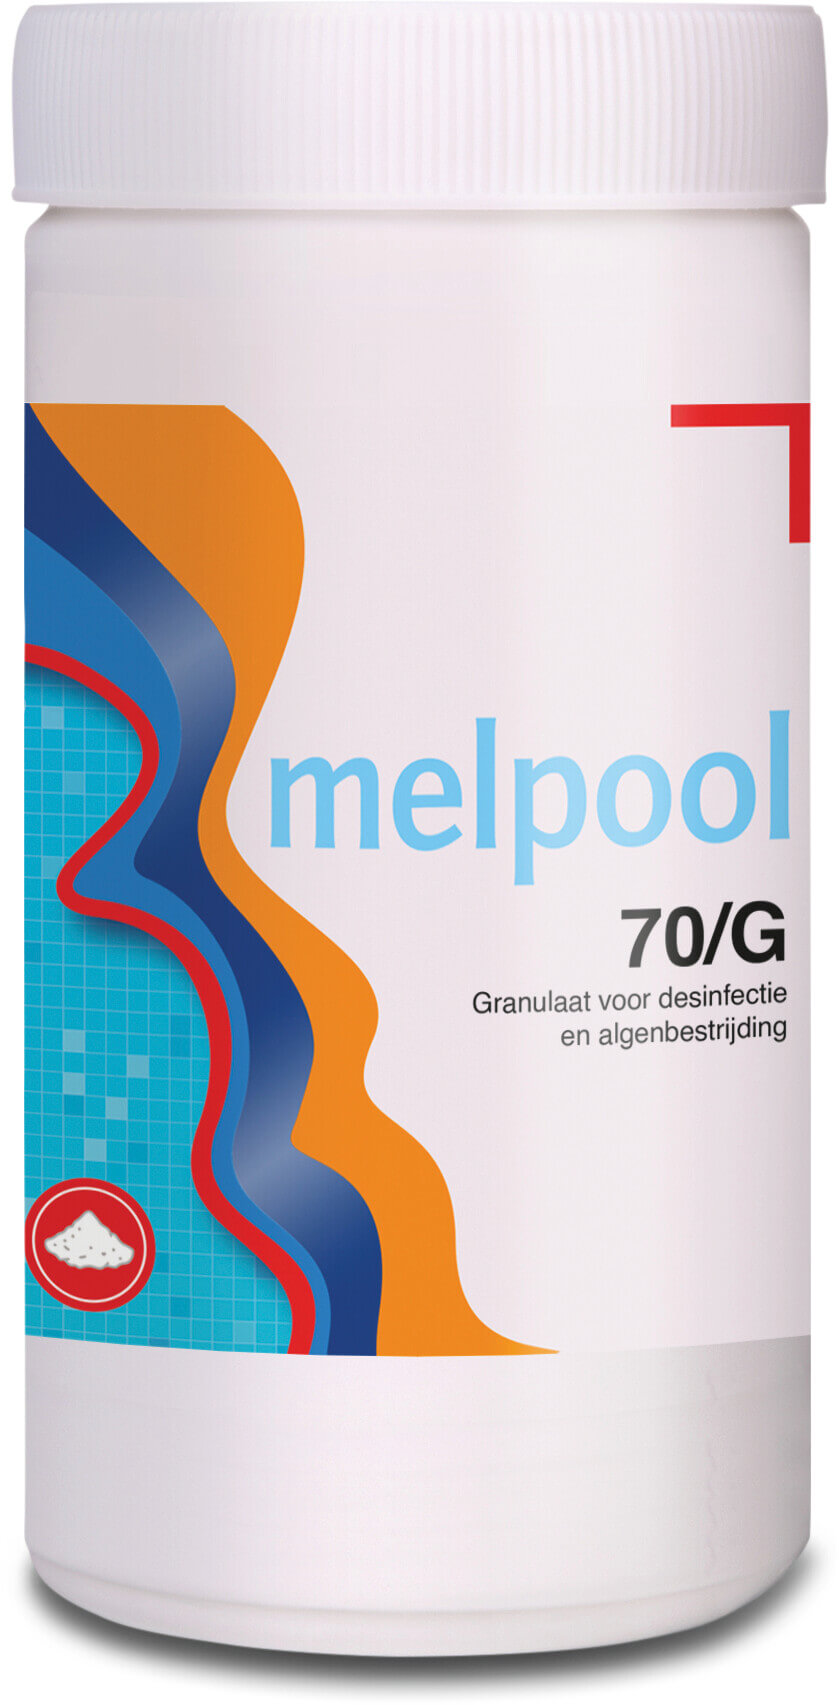 Melpool 70/g calciumhypochlorit hydrerede granulater 70% cl. 1000g